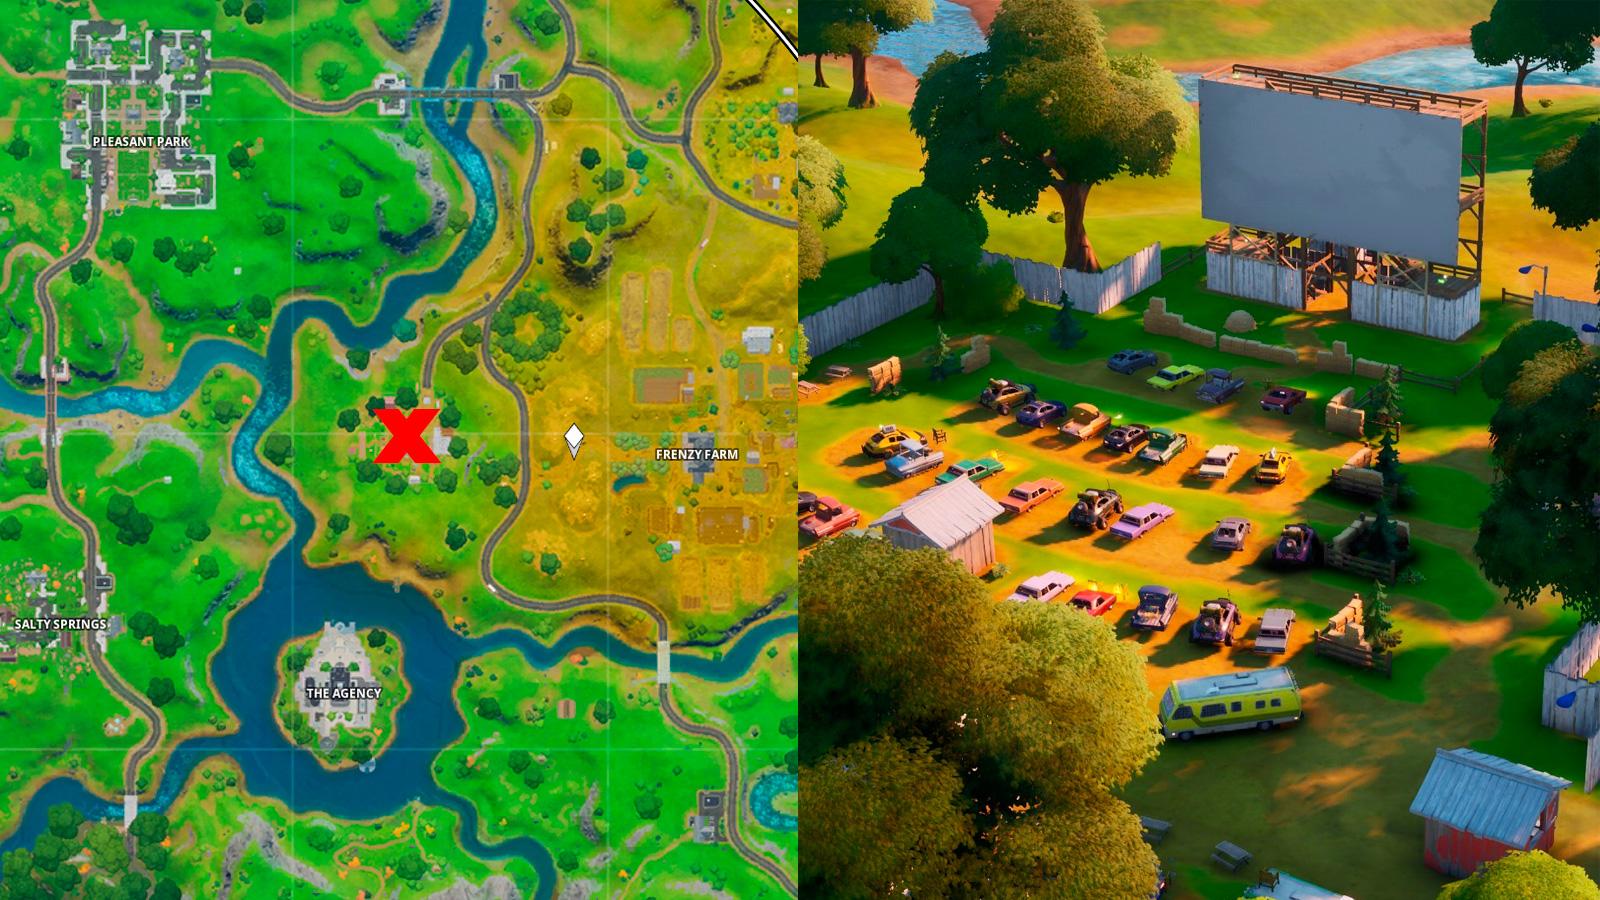 Risky Reels map spot and location in Fortnite.